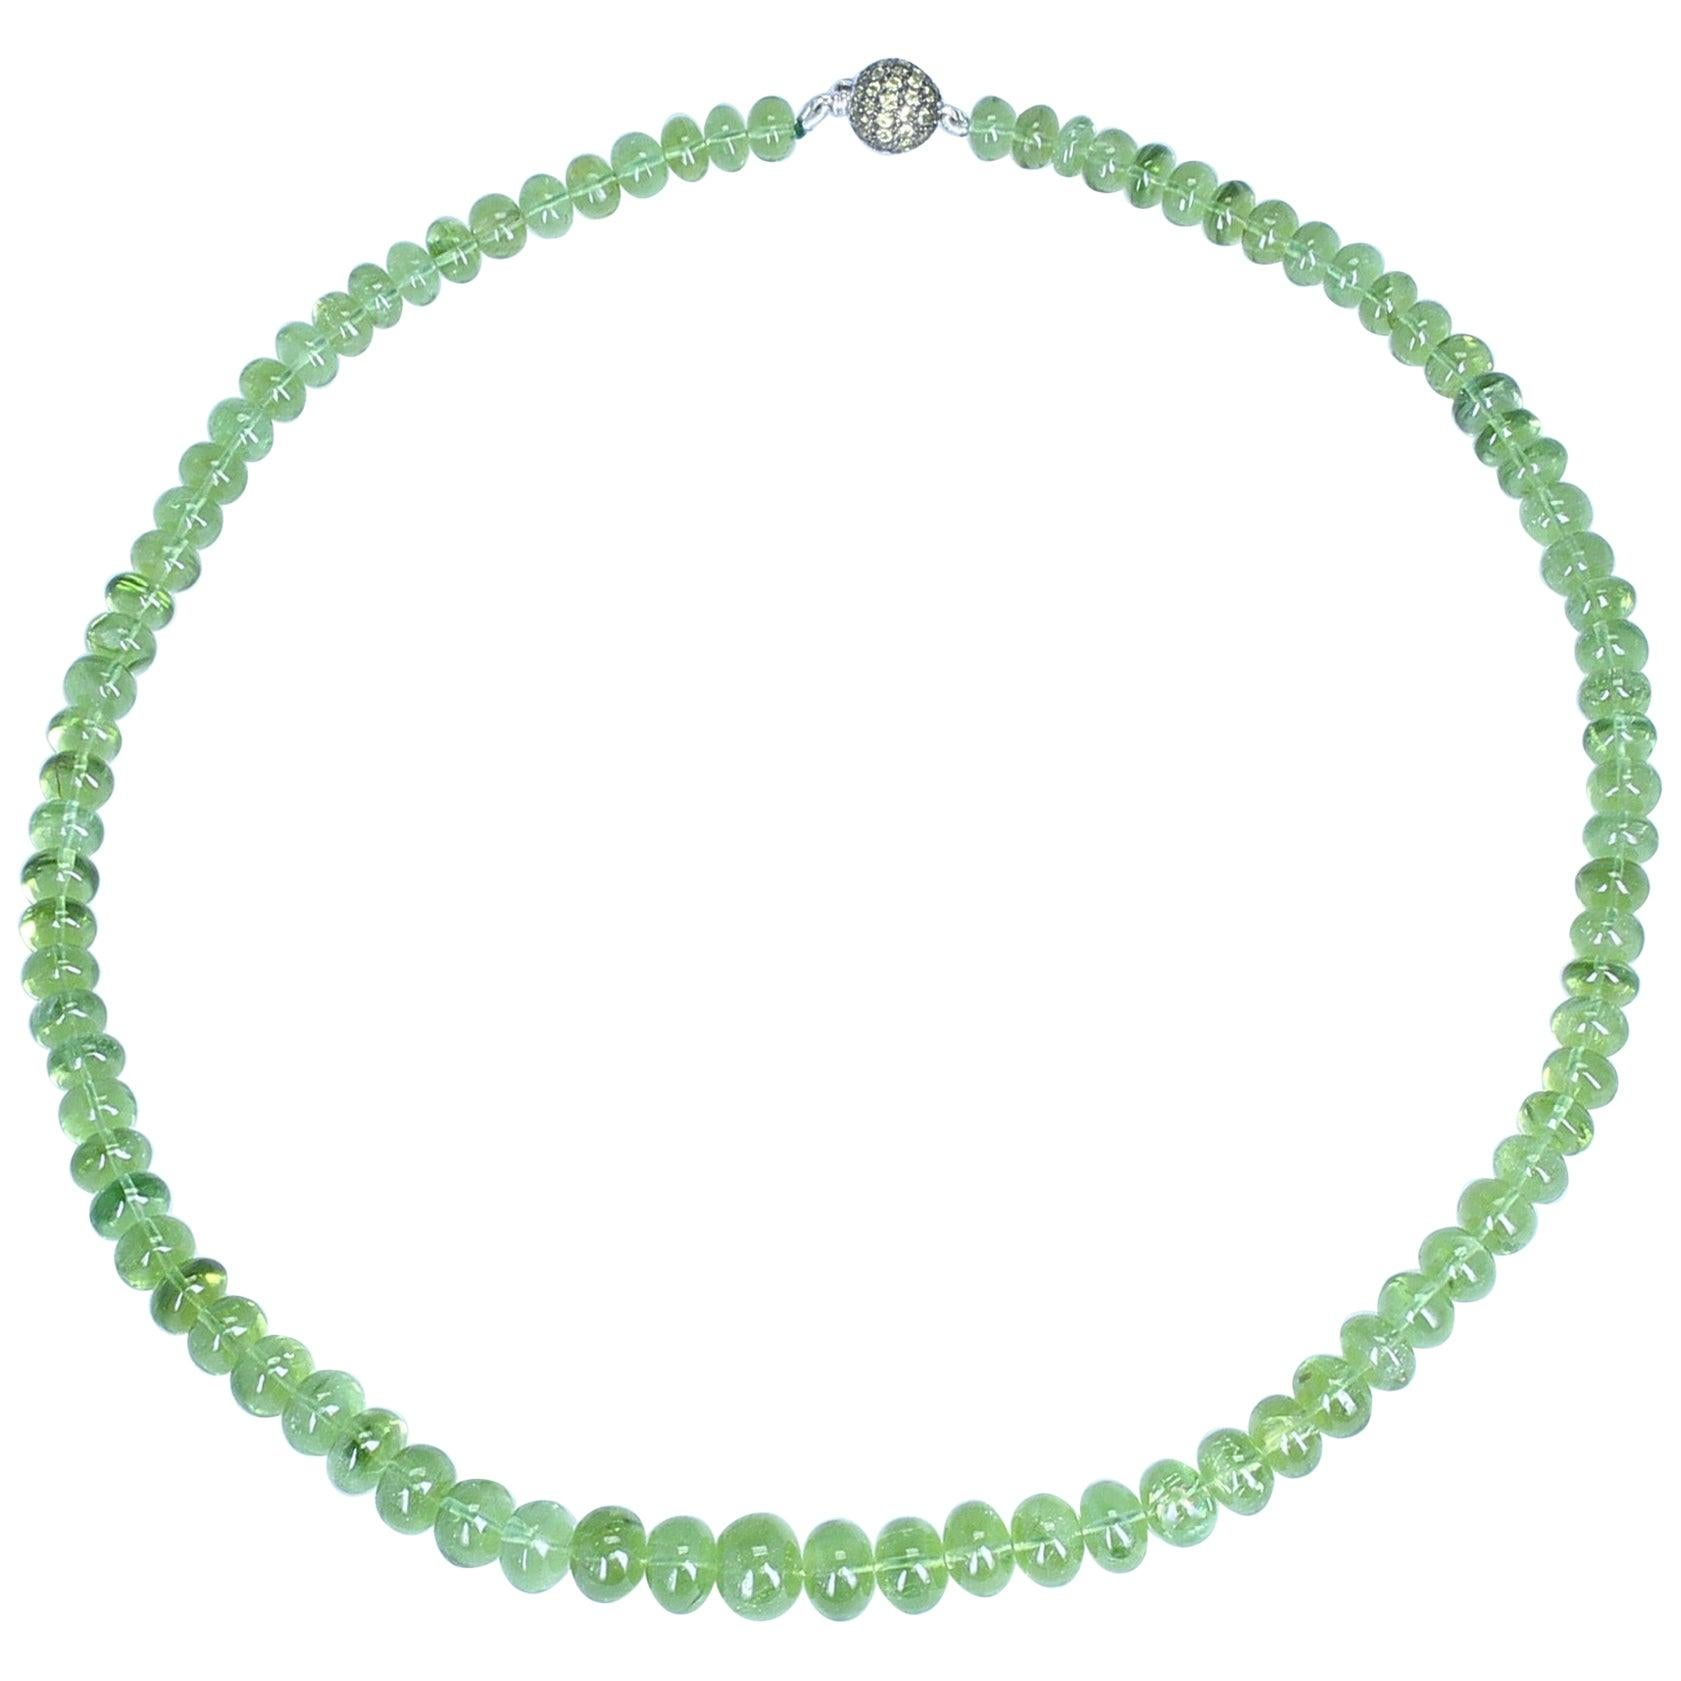 A classic necklace of green Peridot Beads with a Pave setting Tsavorite Clasp, 18K White Gold. Weight: 259.78 cts. Length: 18 inches